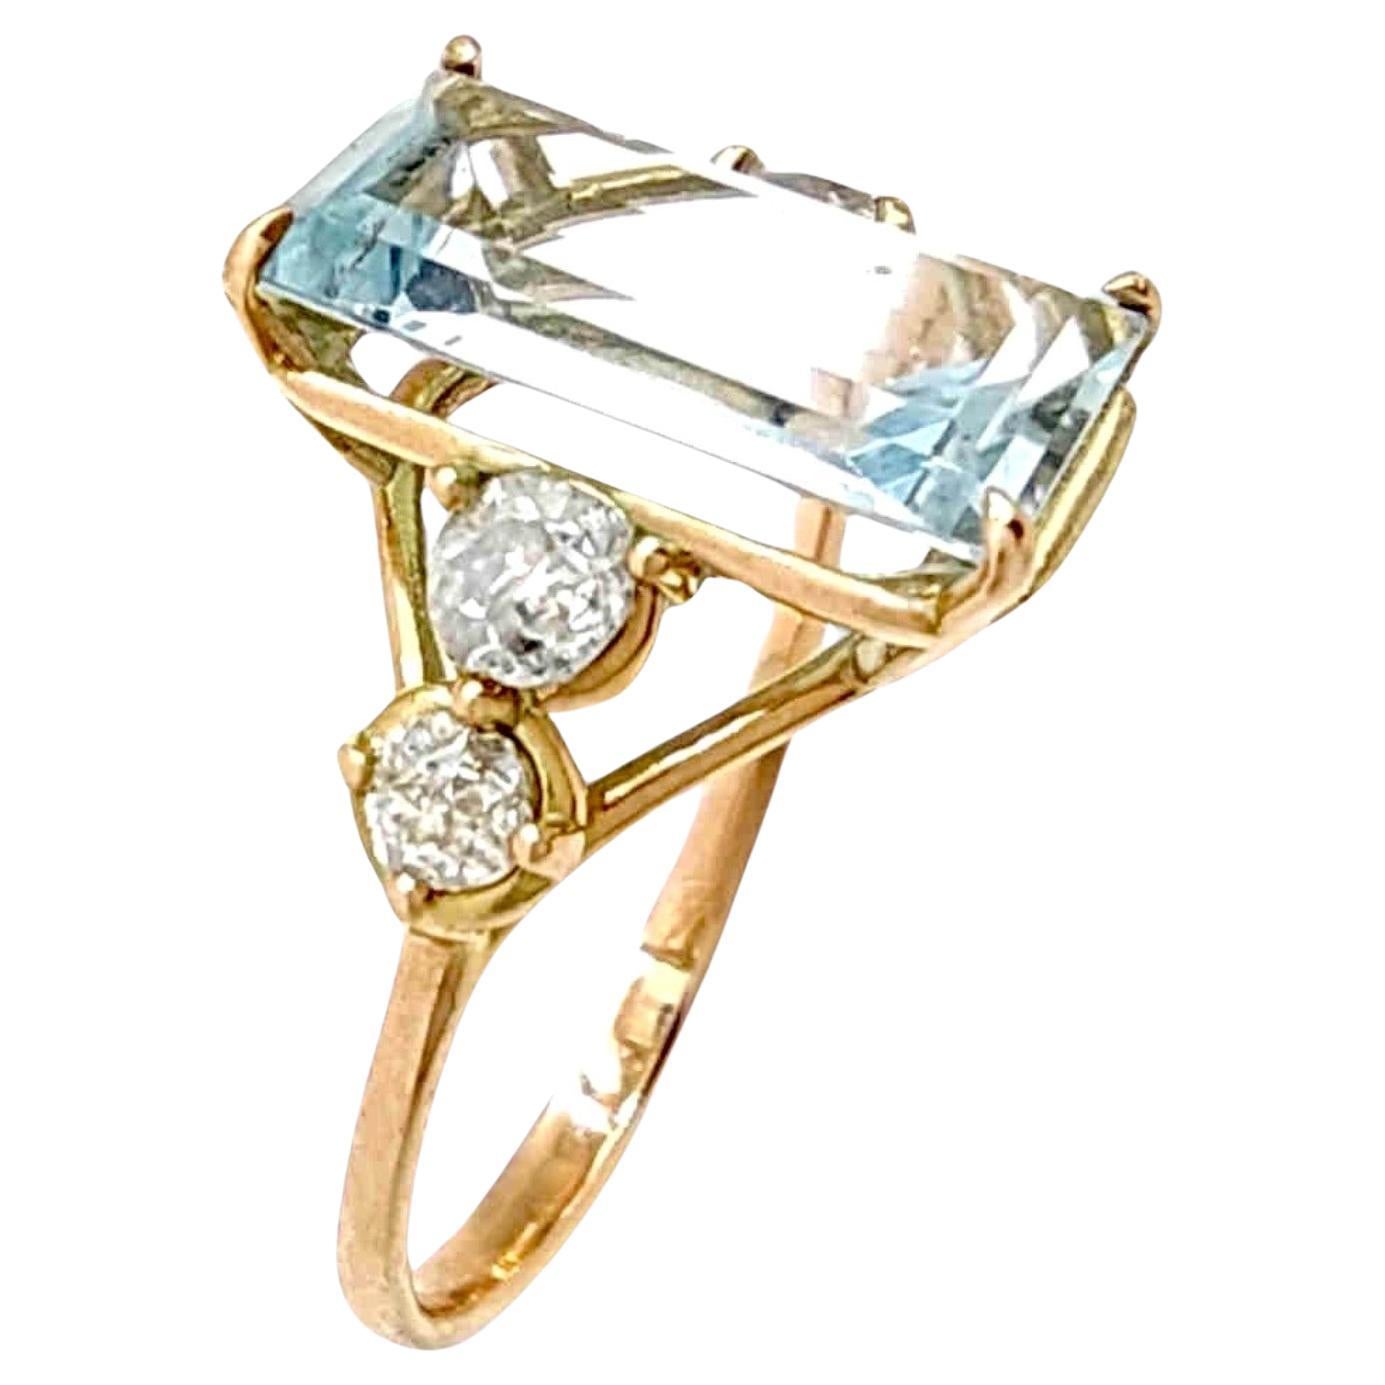 Certified 2.30 carats Aquamarine Engagement Ring - 14k Gold with Diamonds